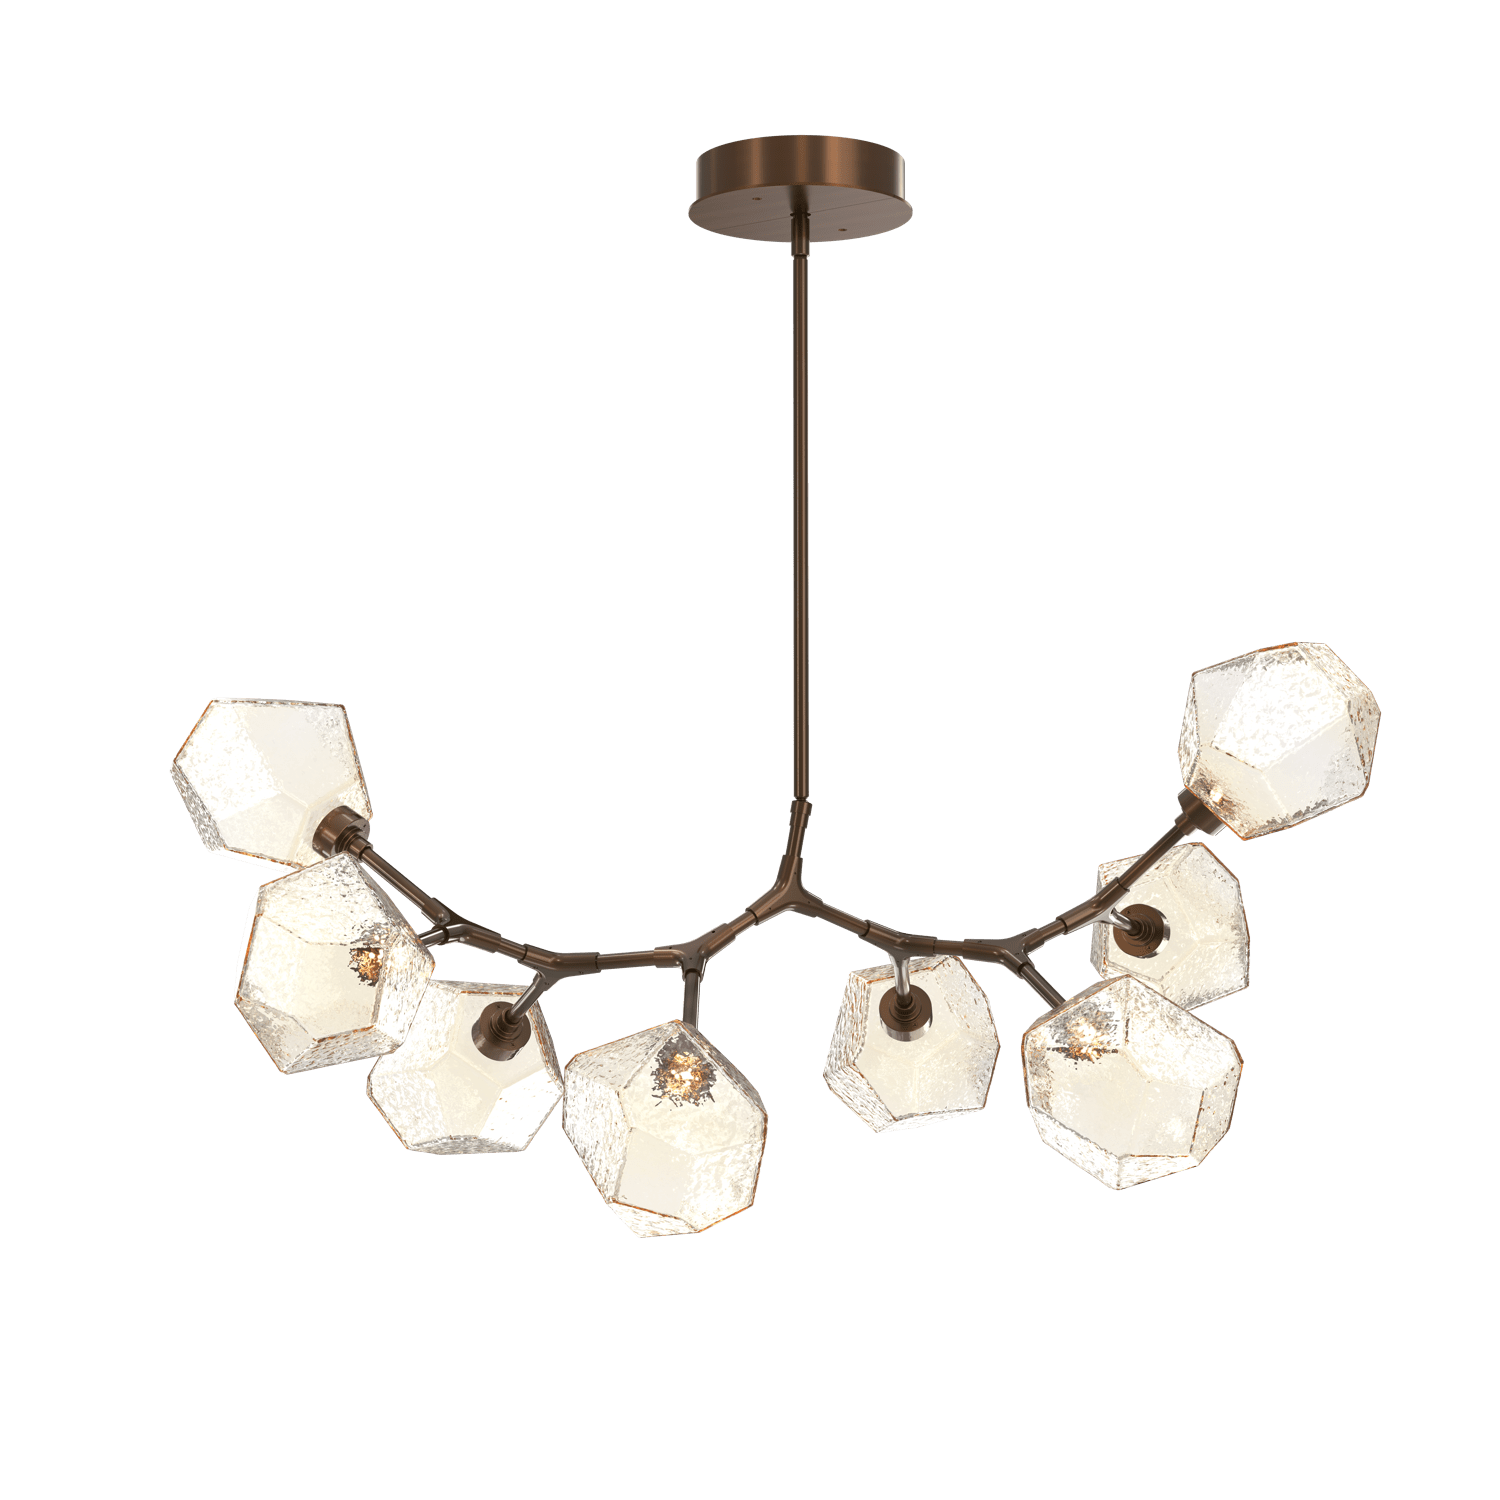 PLB0039-BB-RB-A-Hammerton-Studio-Gem-8-light-modern-branch-chandelier-with-oil-rubbed-bronze-finish-and-amber-blown-glass-shades-and-LED-lamping